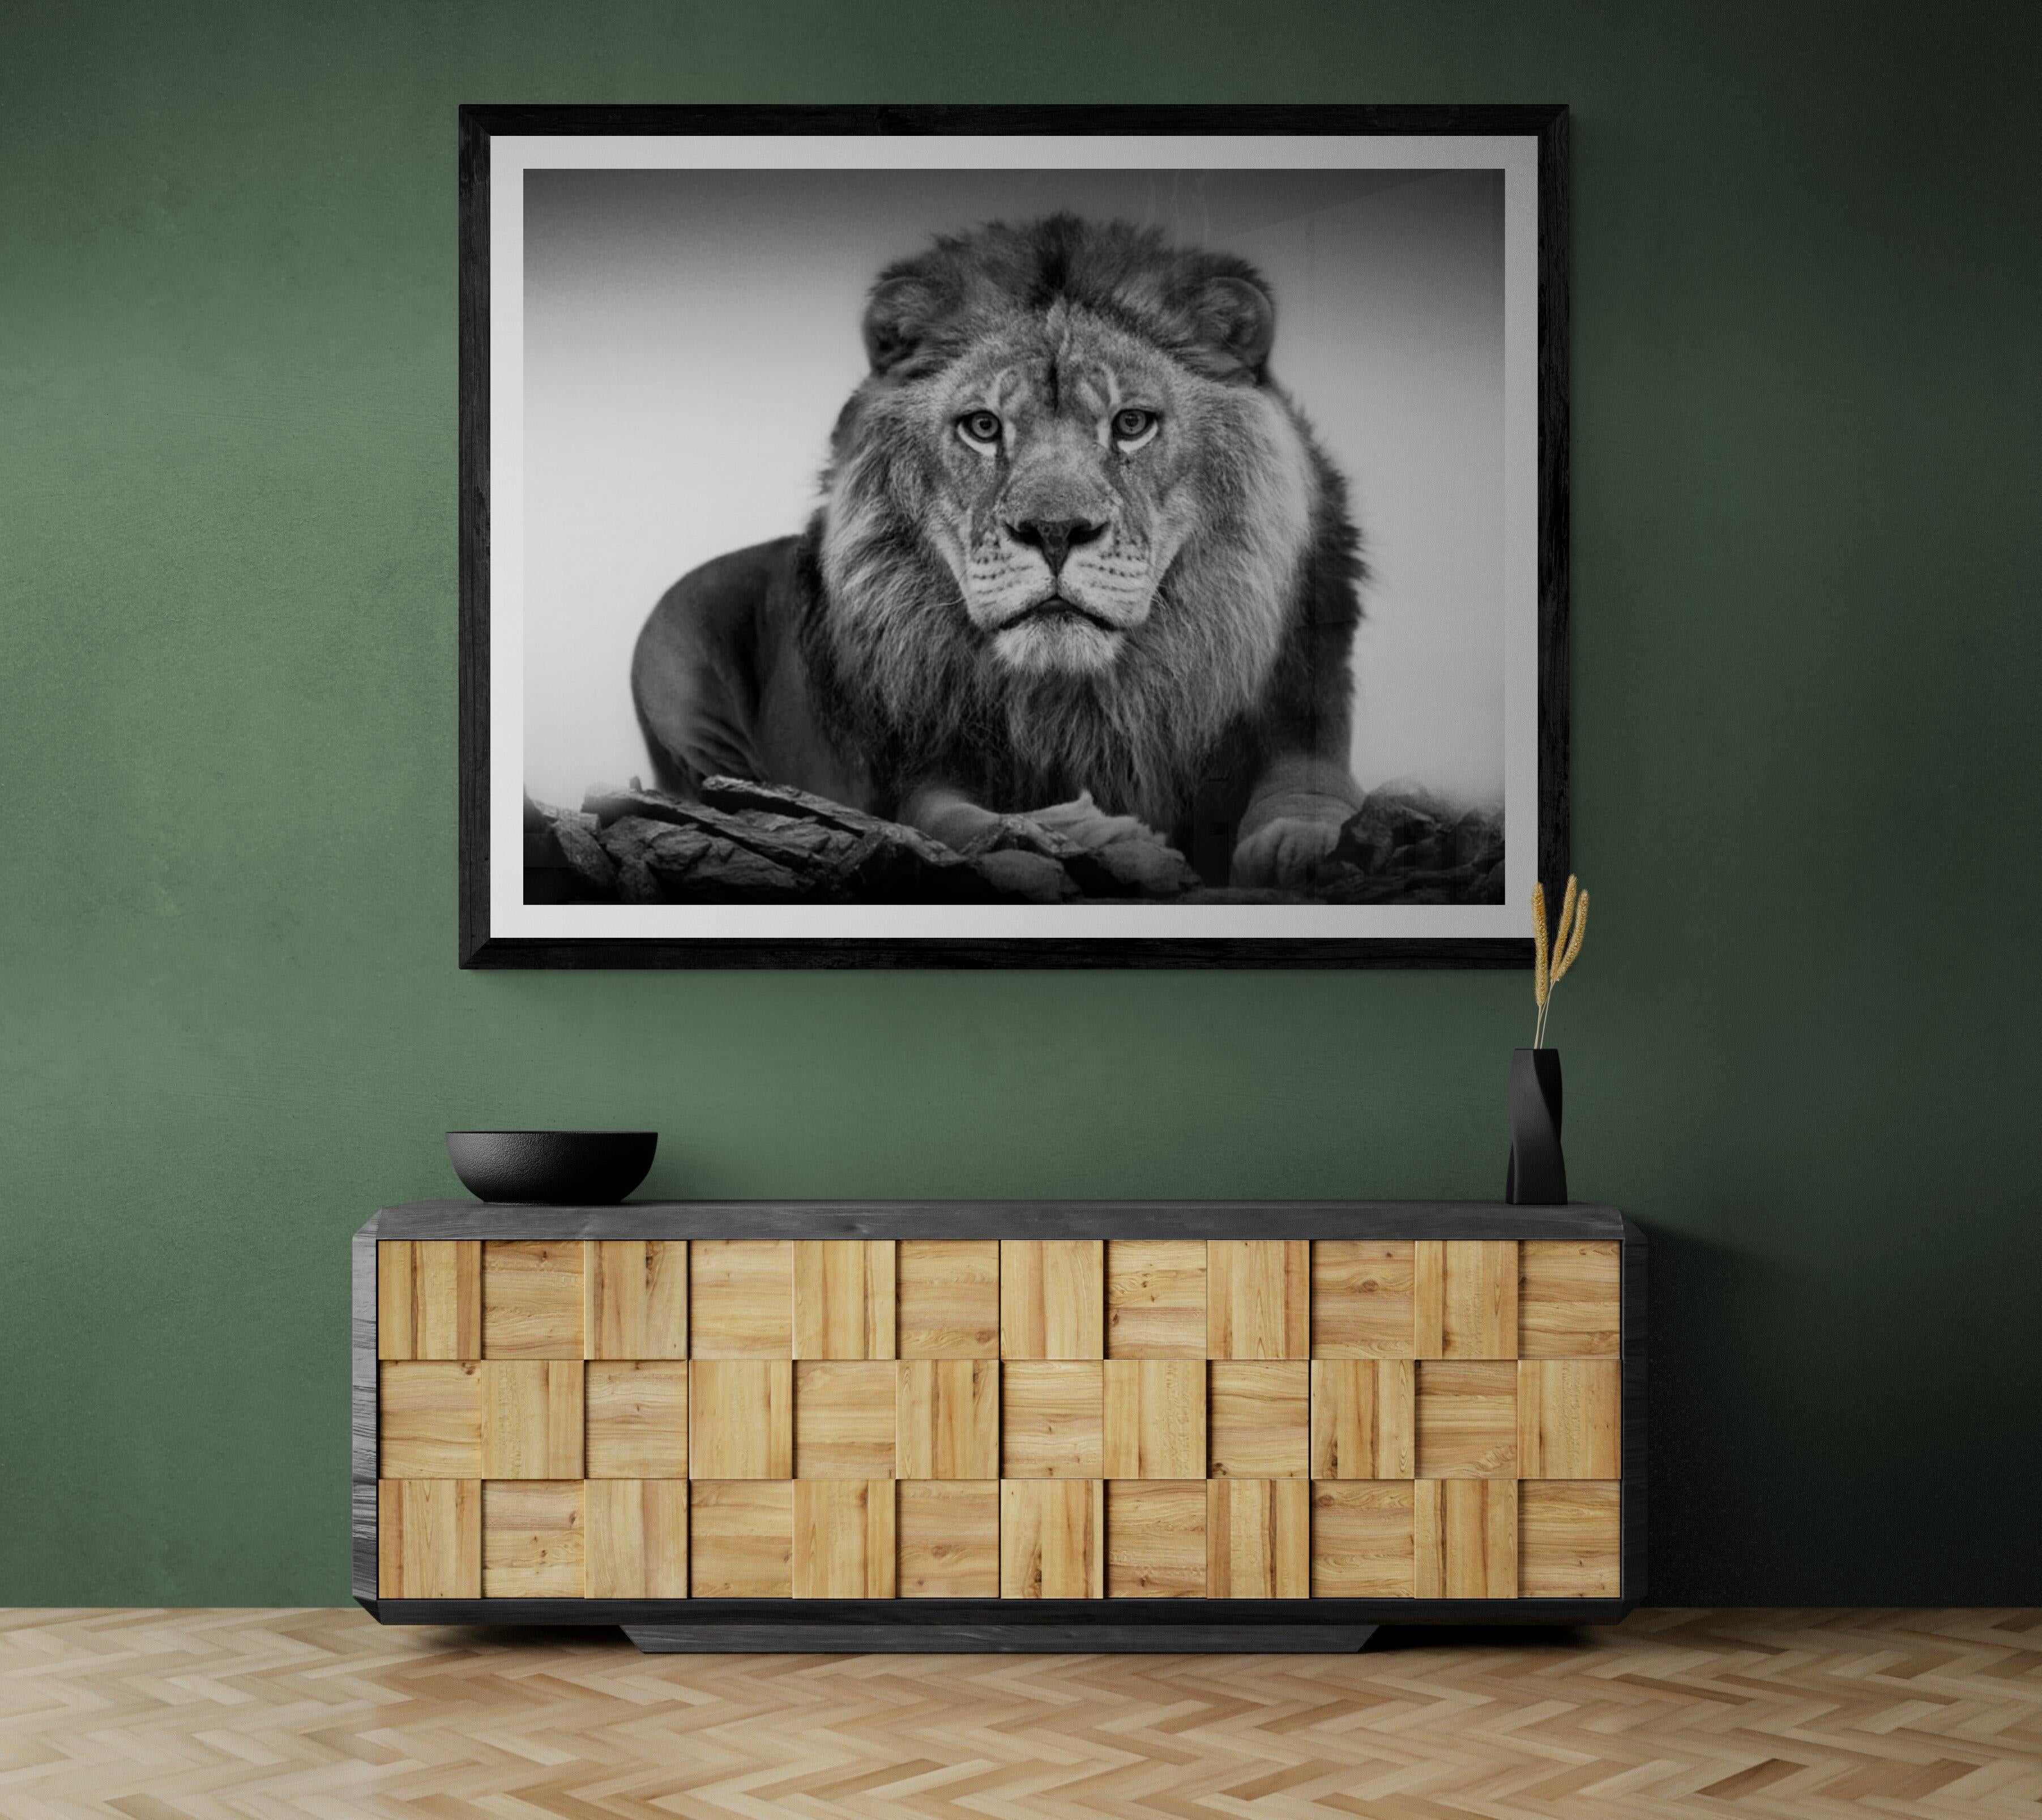 This is a contemporary photograph of an African Lion. 
40x60
Signed and numbered
Edition of 10
Archival Pigment print.
Framing available. Inquire for rates. 

FREE SHIPPING

Shane Russeck has built a reputation for capturing America's landscapes,